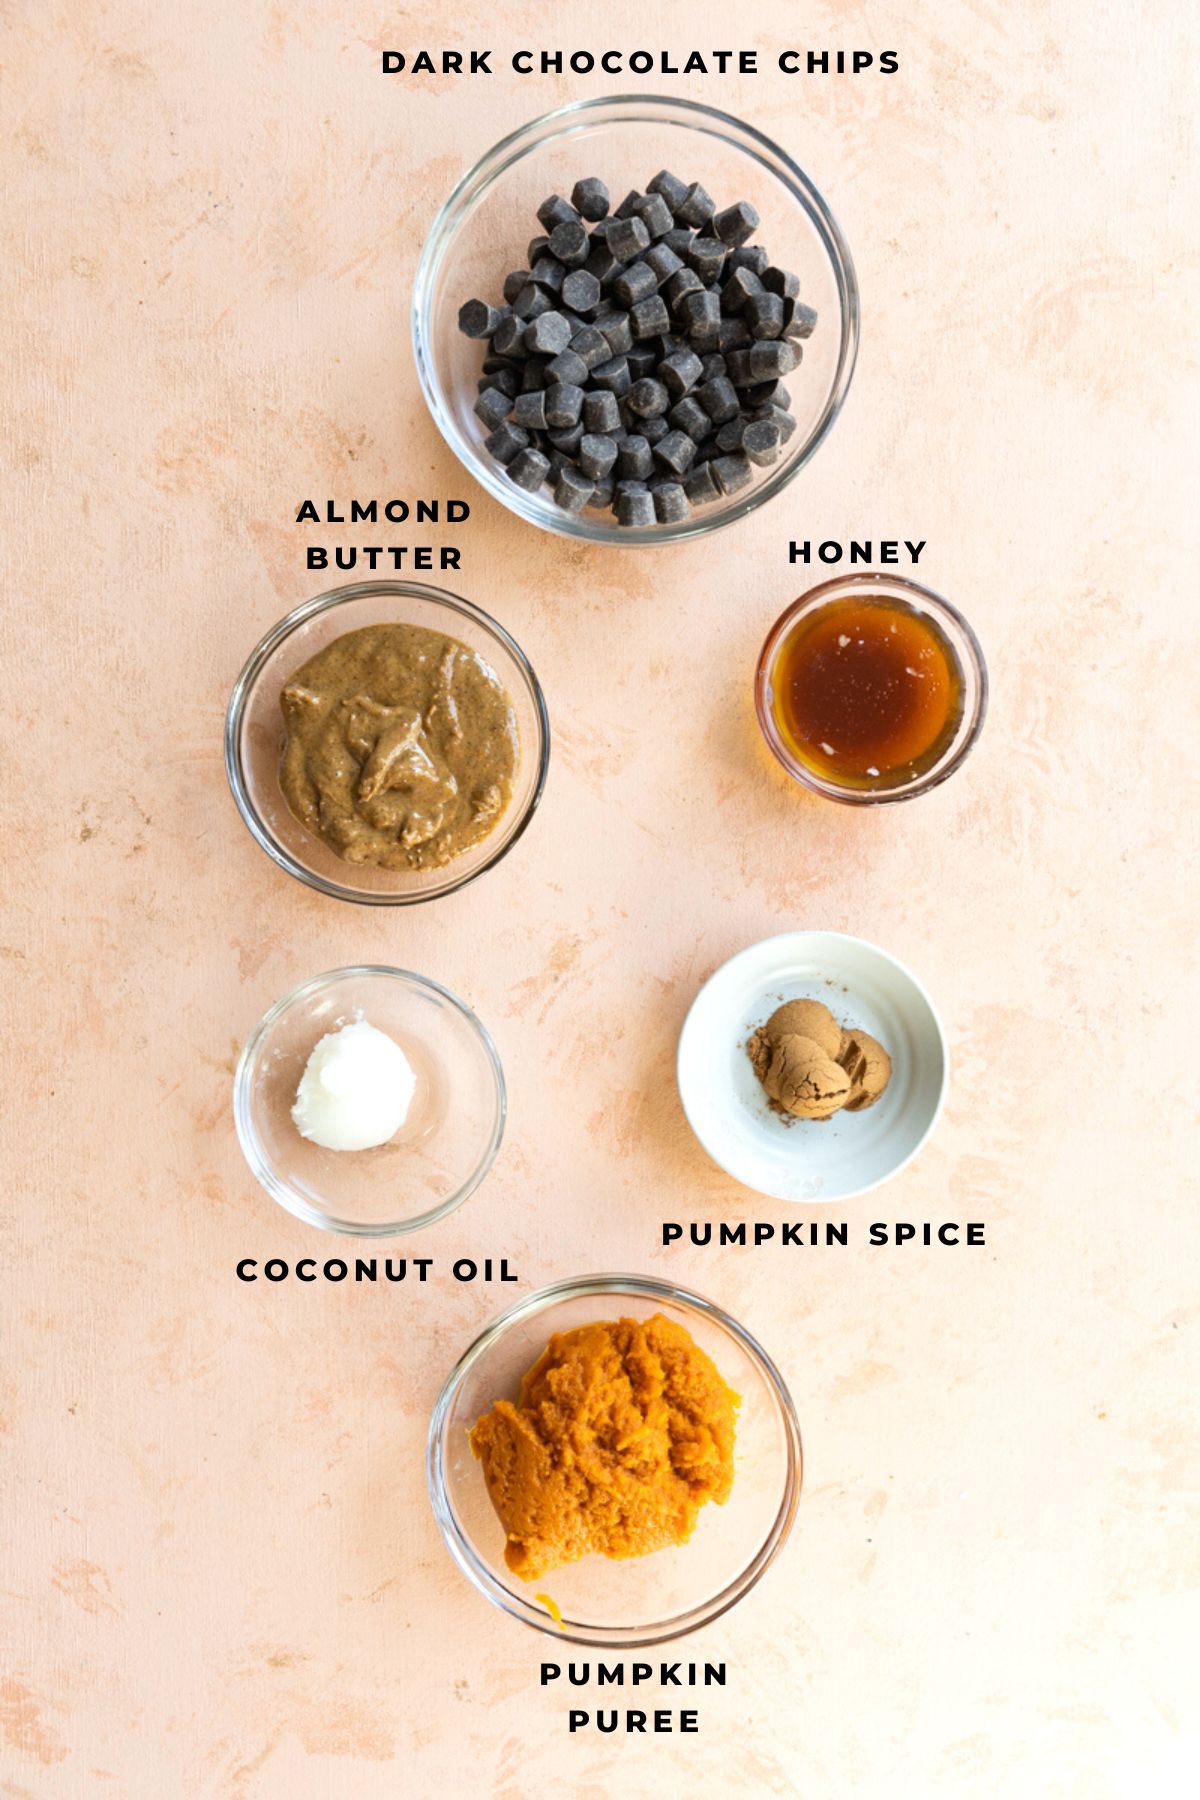 Ingredients measured out of chocolate pumpkin butter cups.